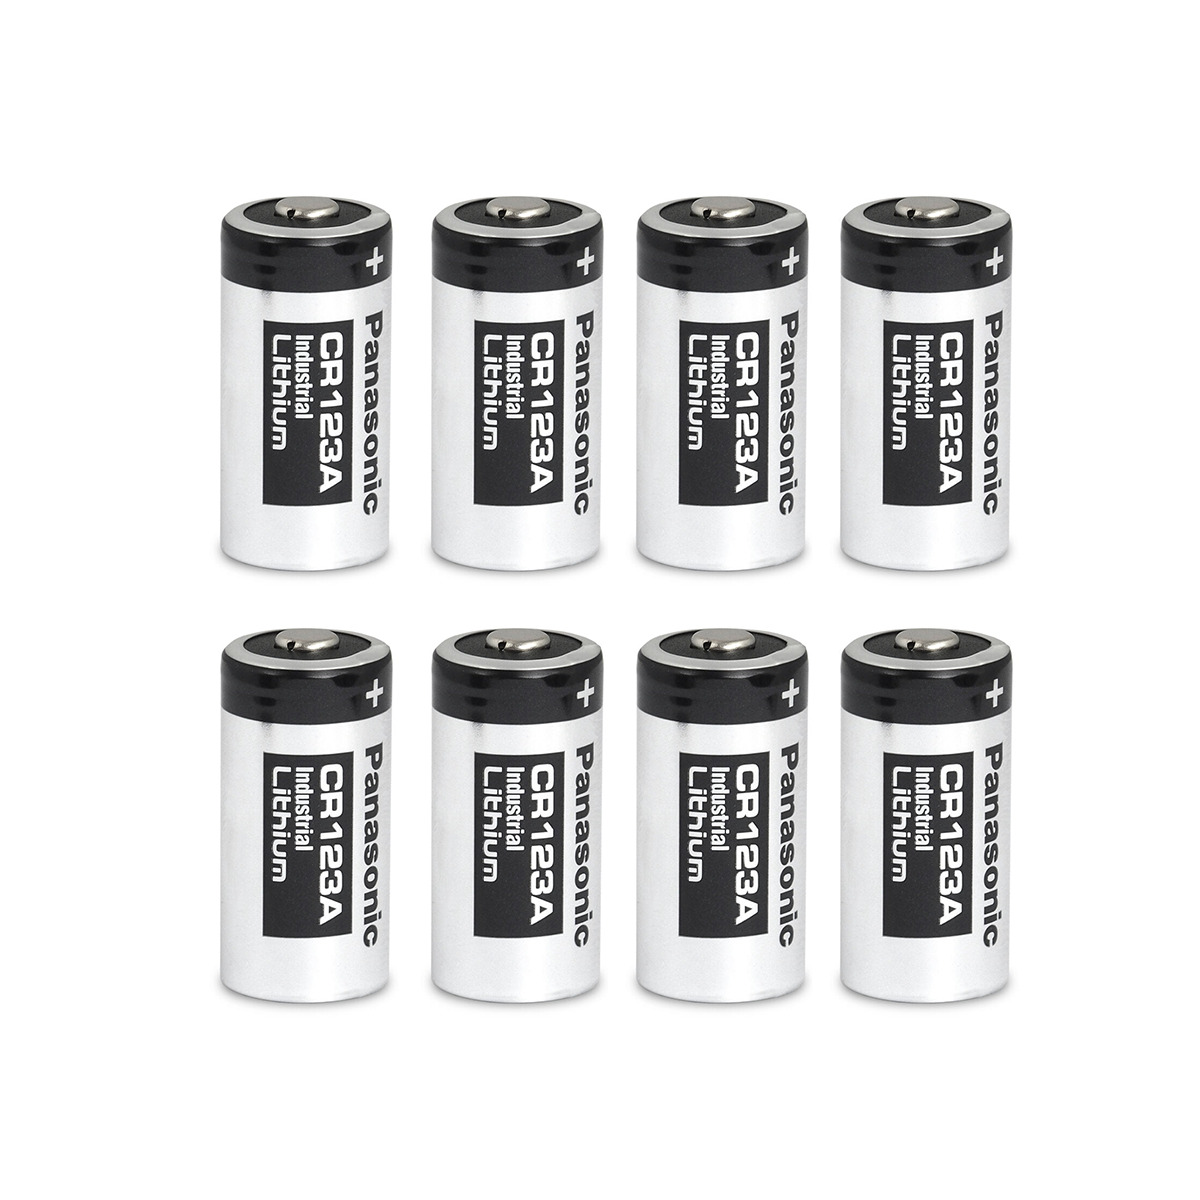 Panasonic CR123A 3V Industrial Lithium Batteries (Silver/Black) (8 Pack) + Track